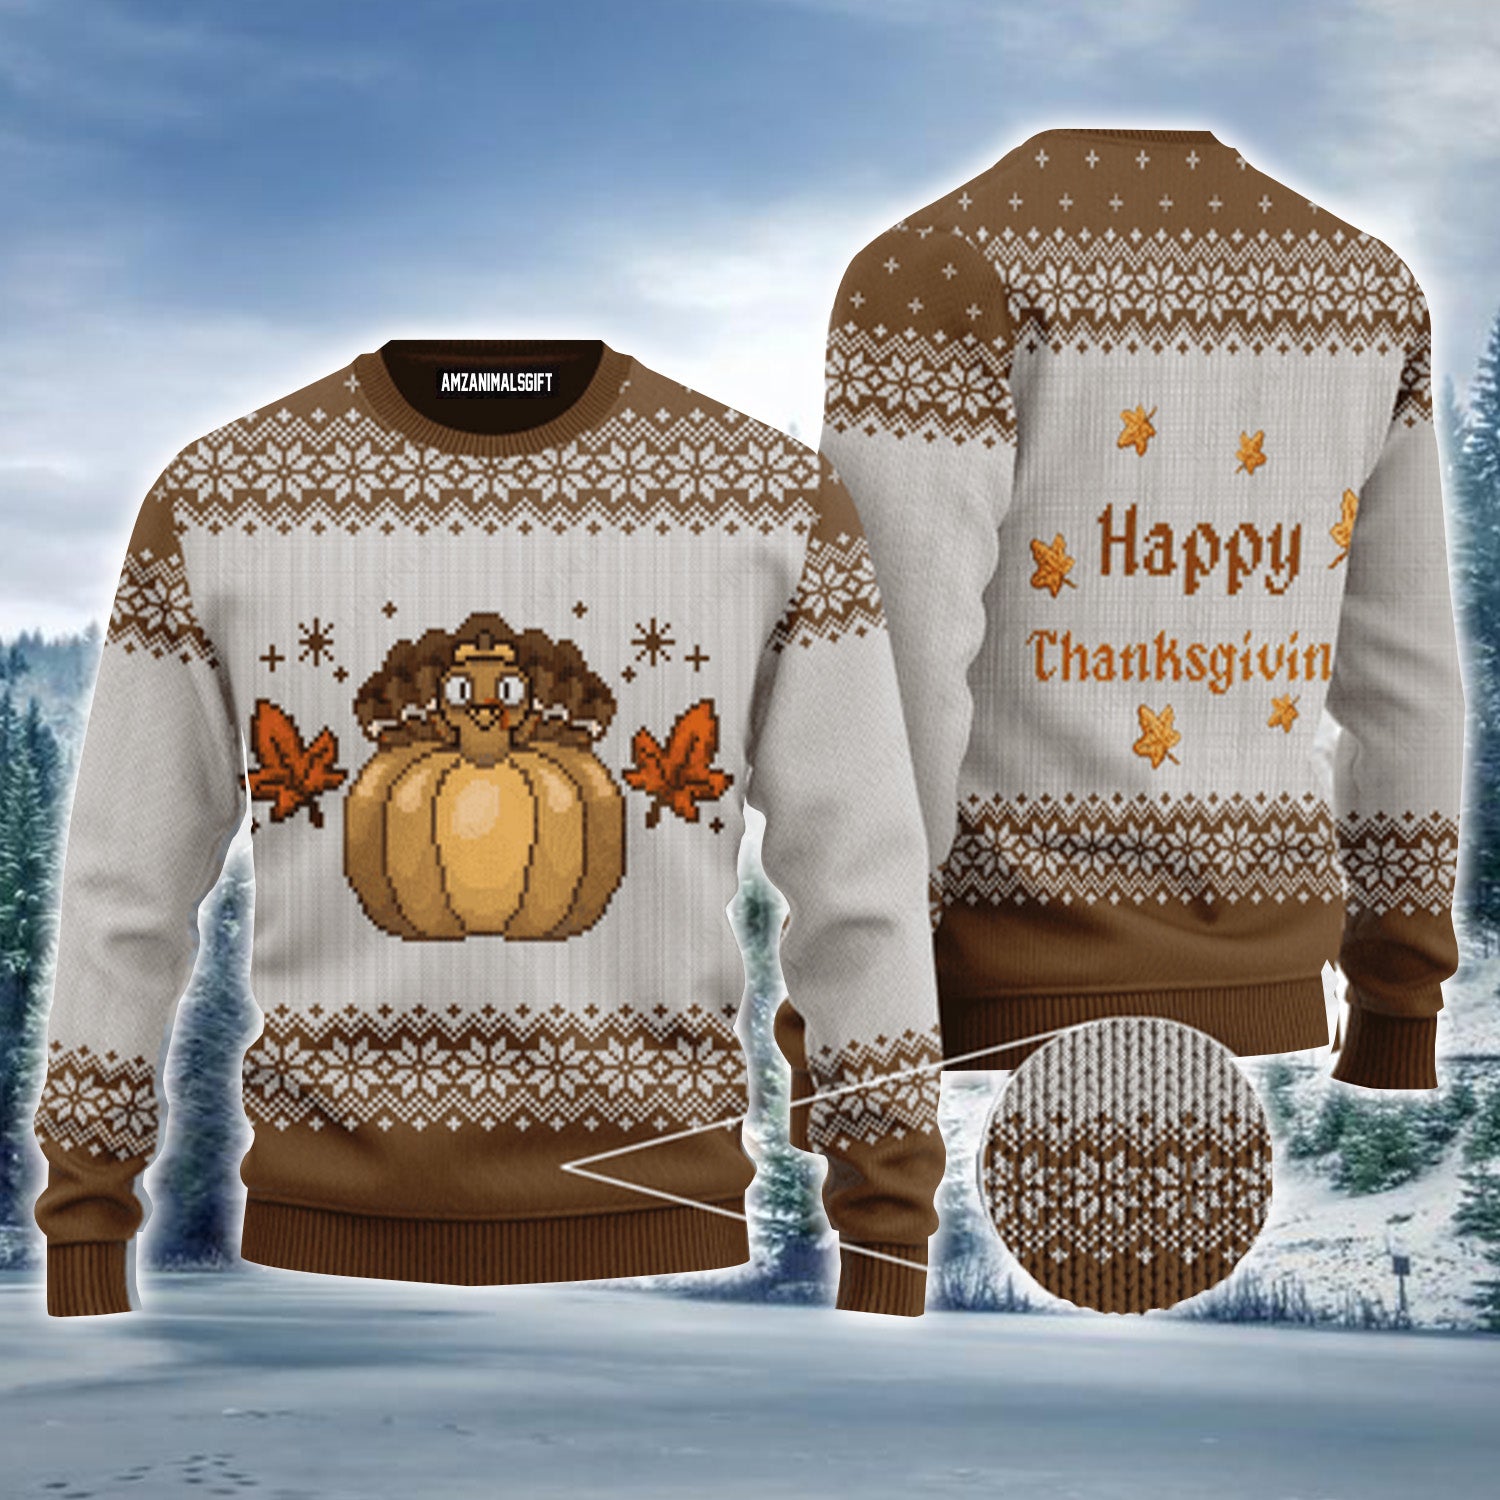 Vintage Happy Thanksgiving Turkey Pumpkin Urly Sweater, Thanksgiving Sweater For Men & Women - Perfect Gift For Thanksgiving, New Year, Winter